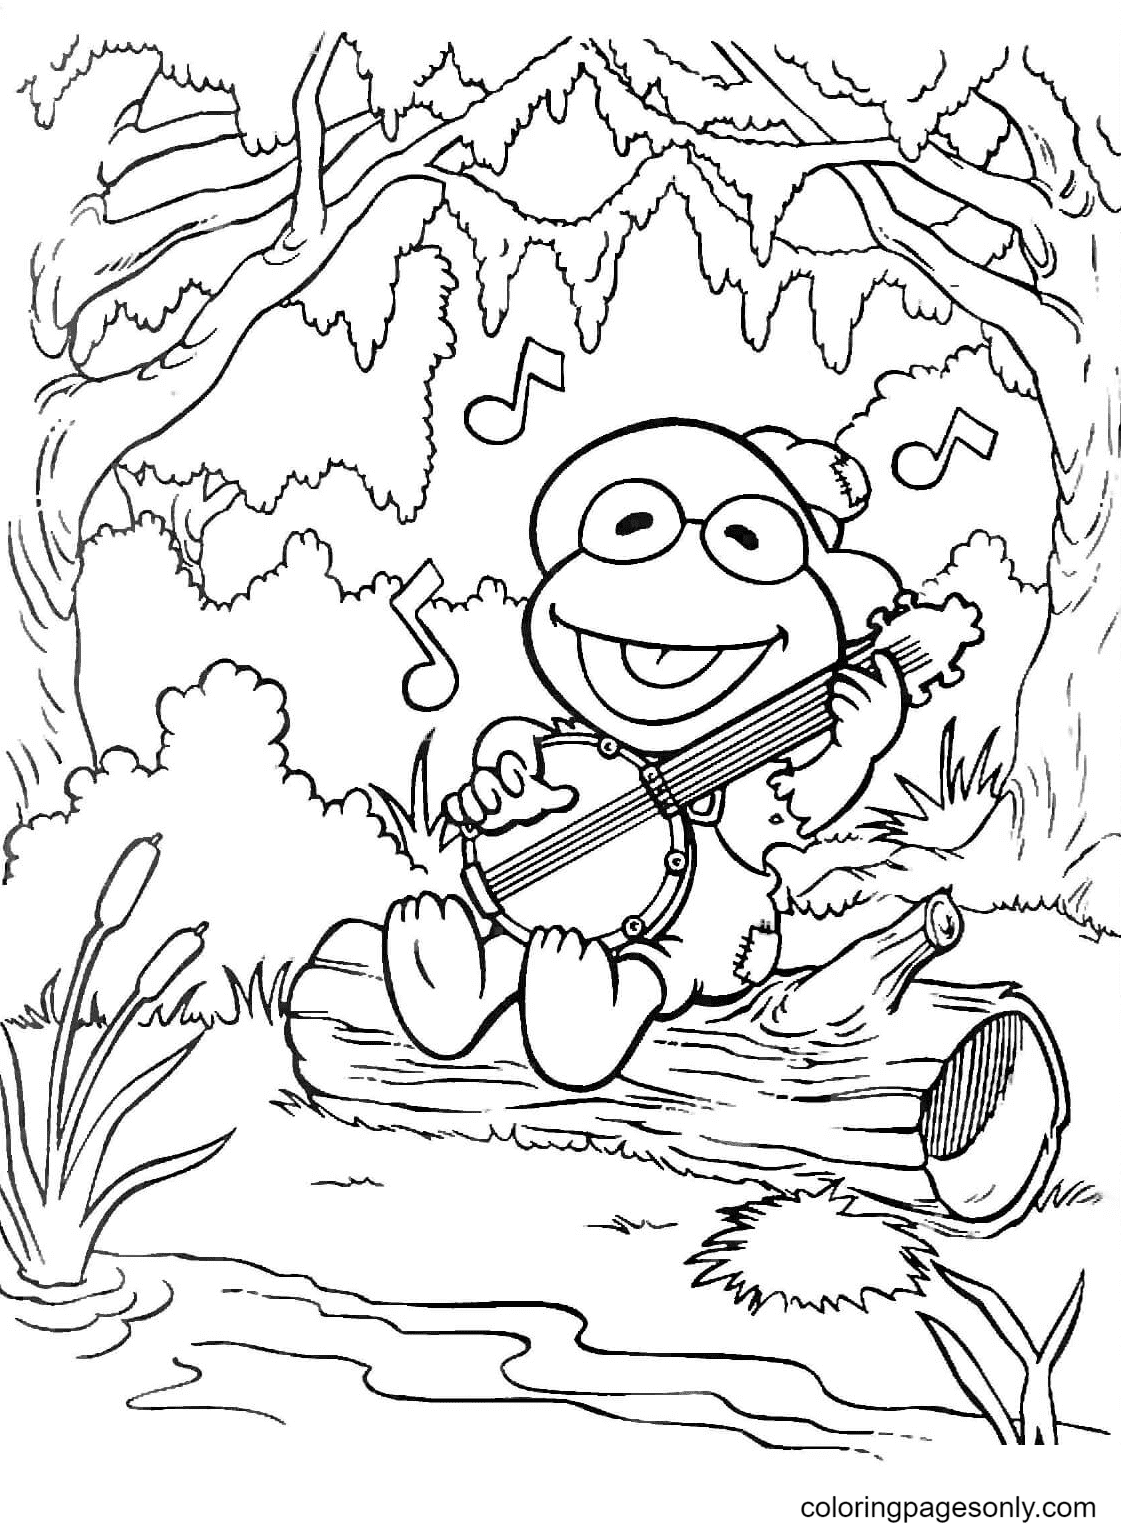 Kermit Sings A Song Coloring Pages